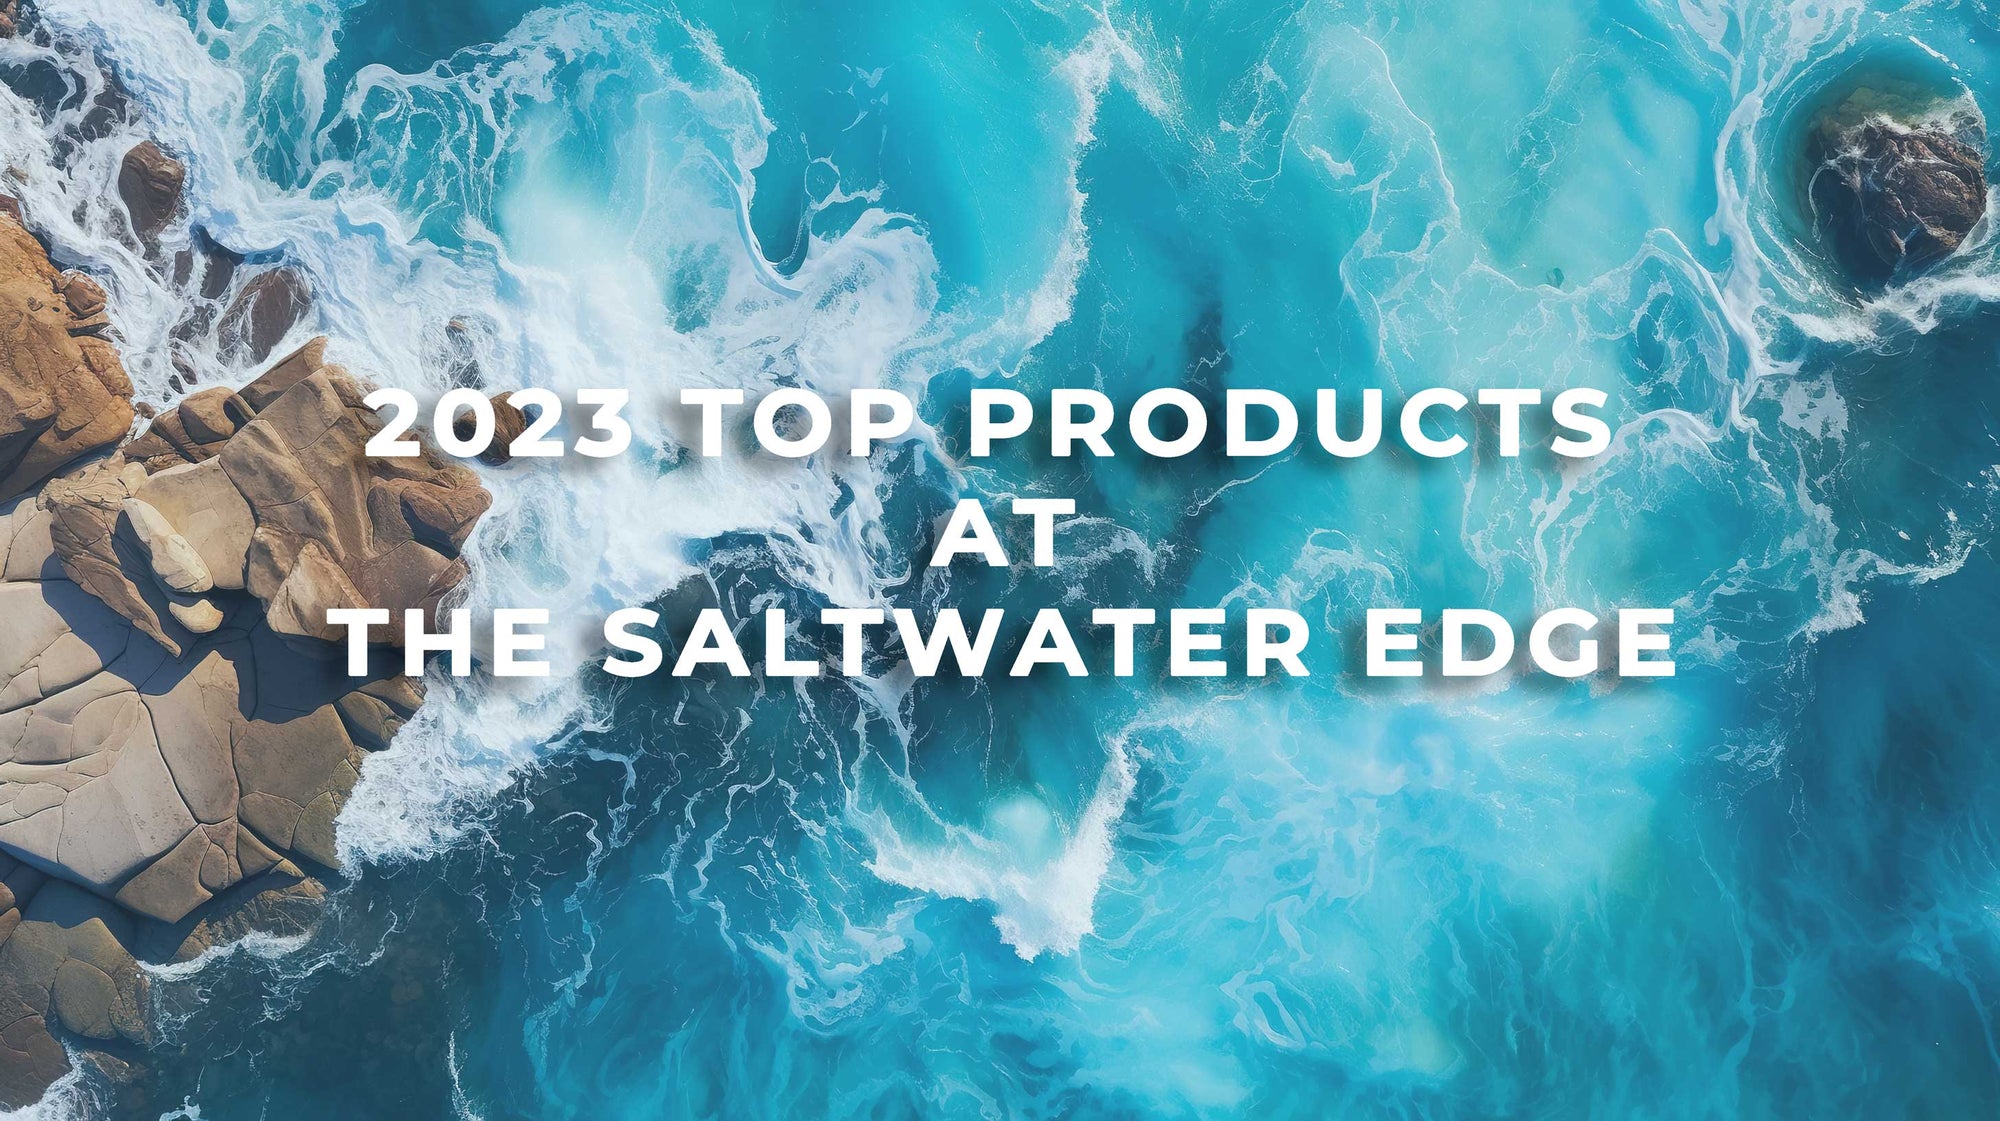 Saltwater Edge Top Products of 2023